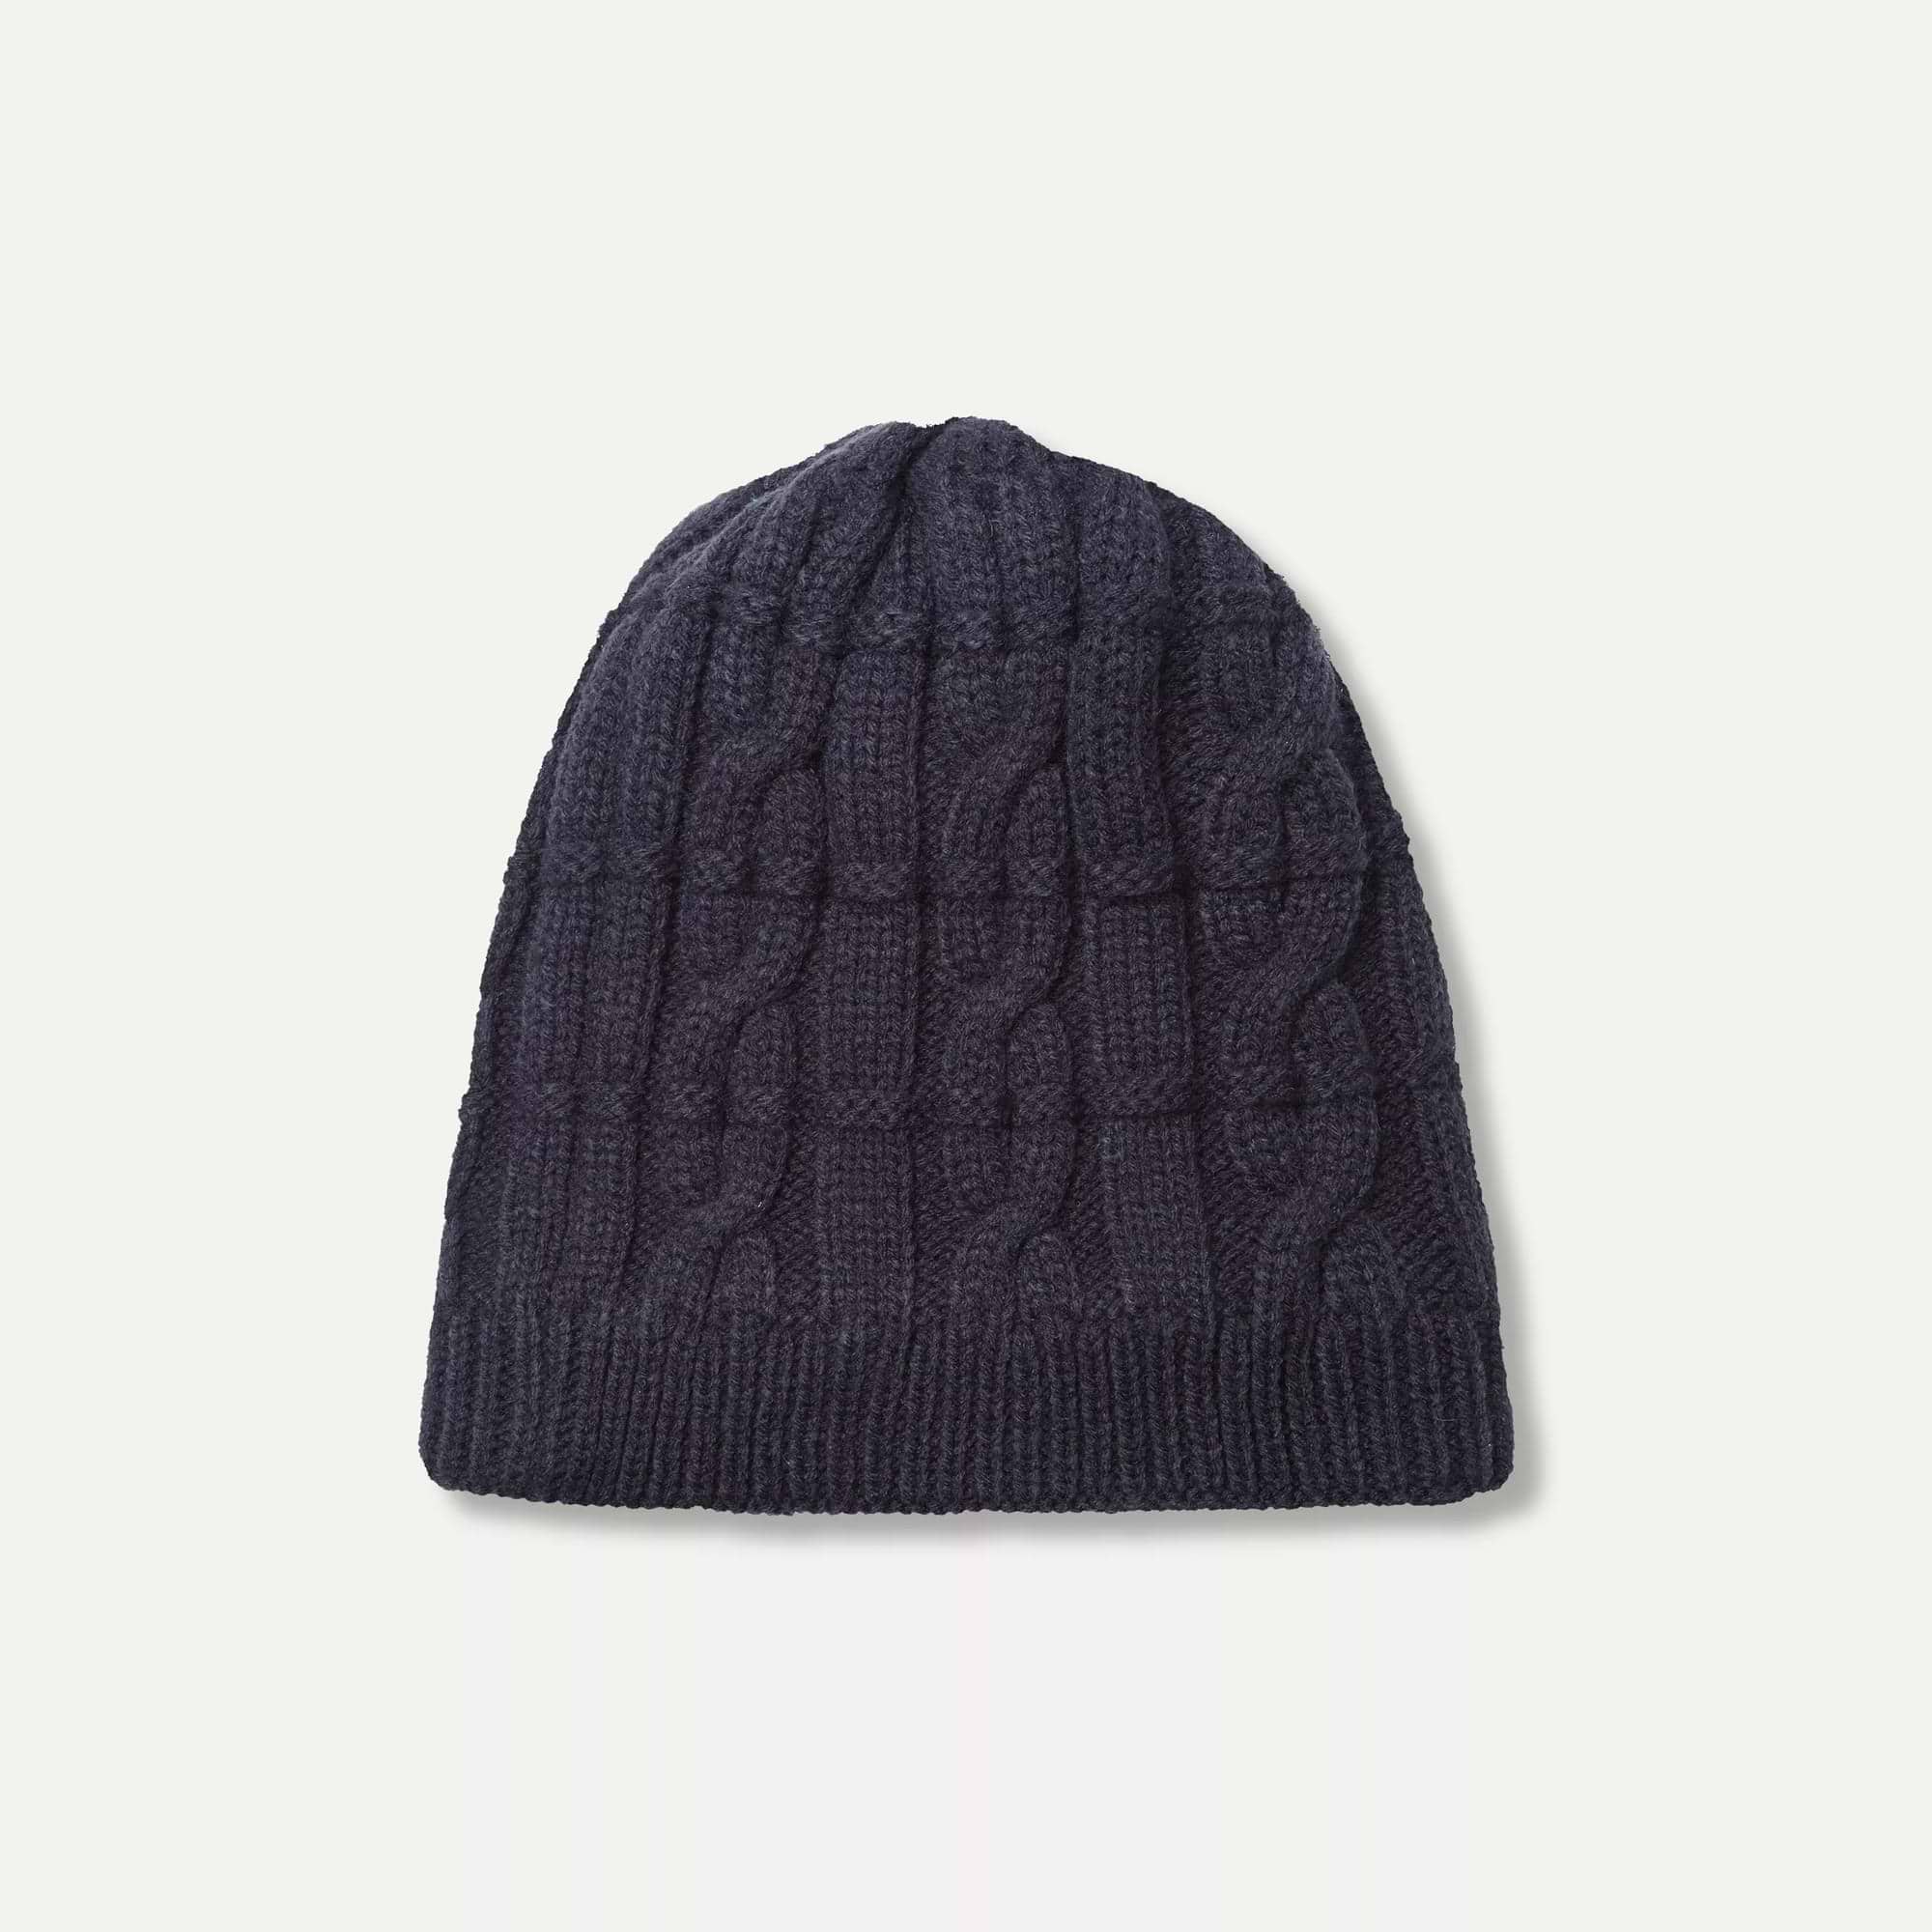 Blakeney - Waterproof Cold Weather Cable Knit Beanie Hat 